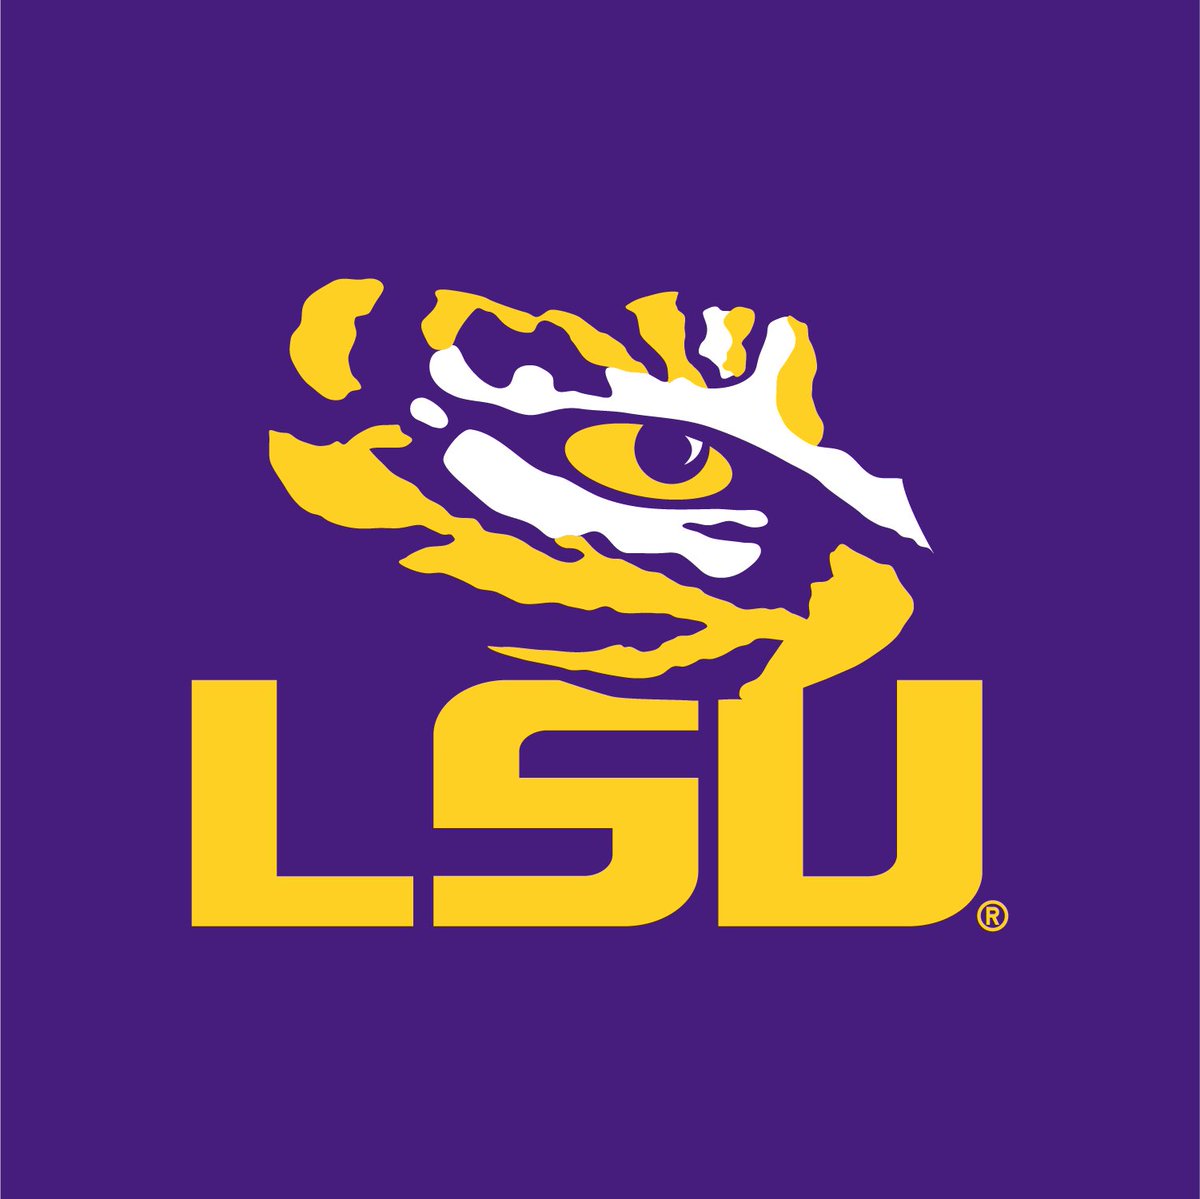 I’m super excited to announce that after graduating from Southern Miss this past week, I will be joining @LSUsports as an Assistant Director of Marketing. Thank you Southern Miss for everything and I can’t wait for this next chapter in Baton Rouge! #GeauxTigers